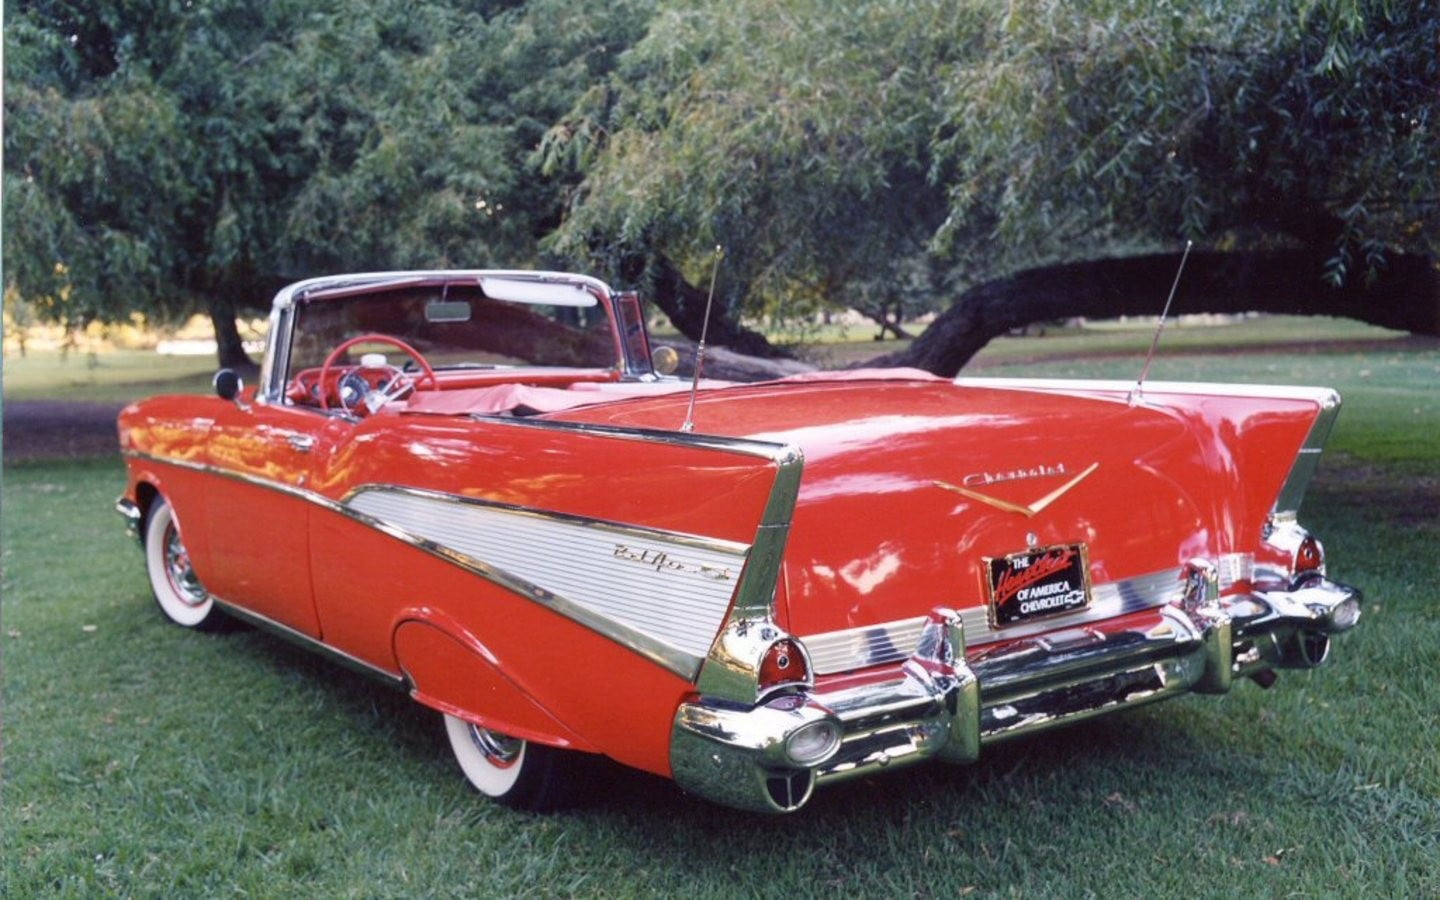 800x600 resolution | classic red and white convertible coupe, Chevrolet ...